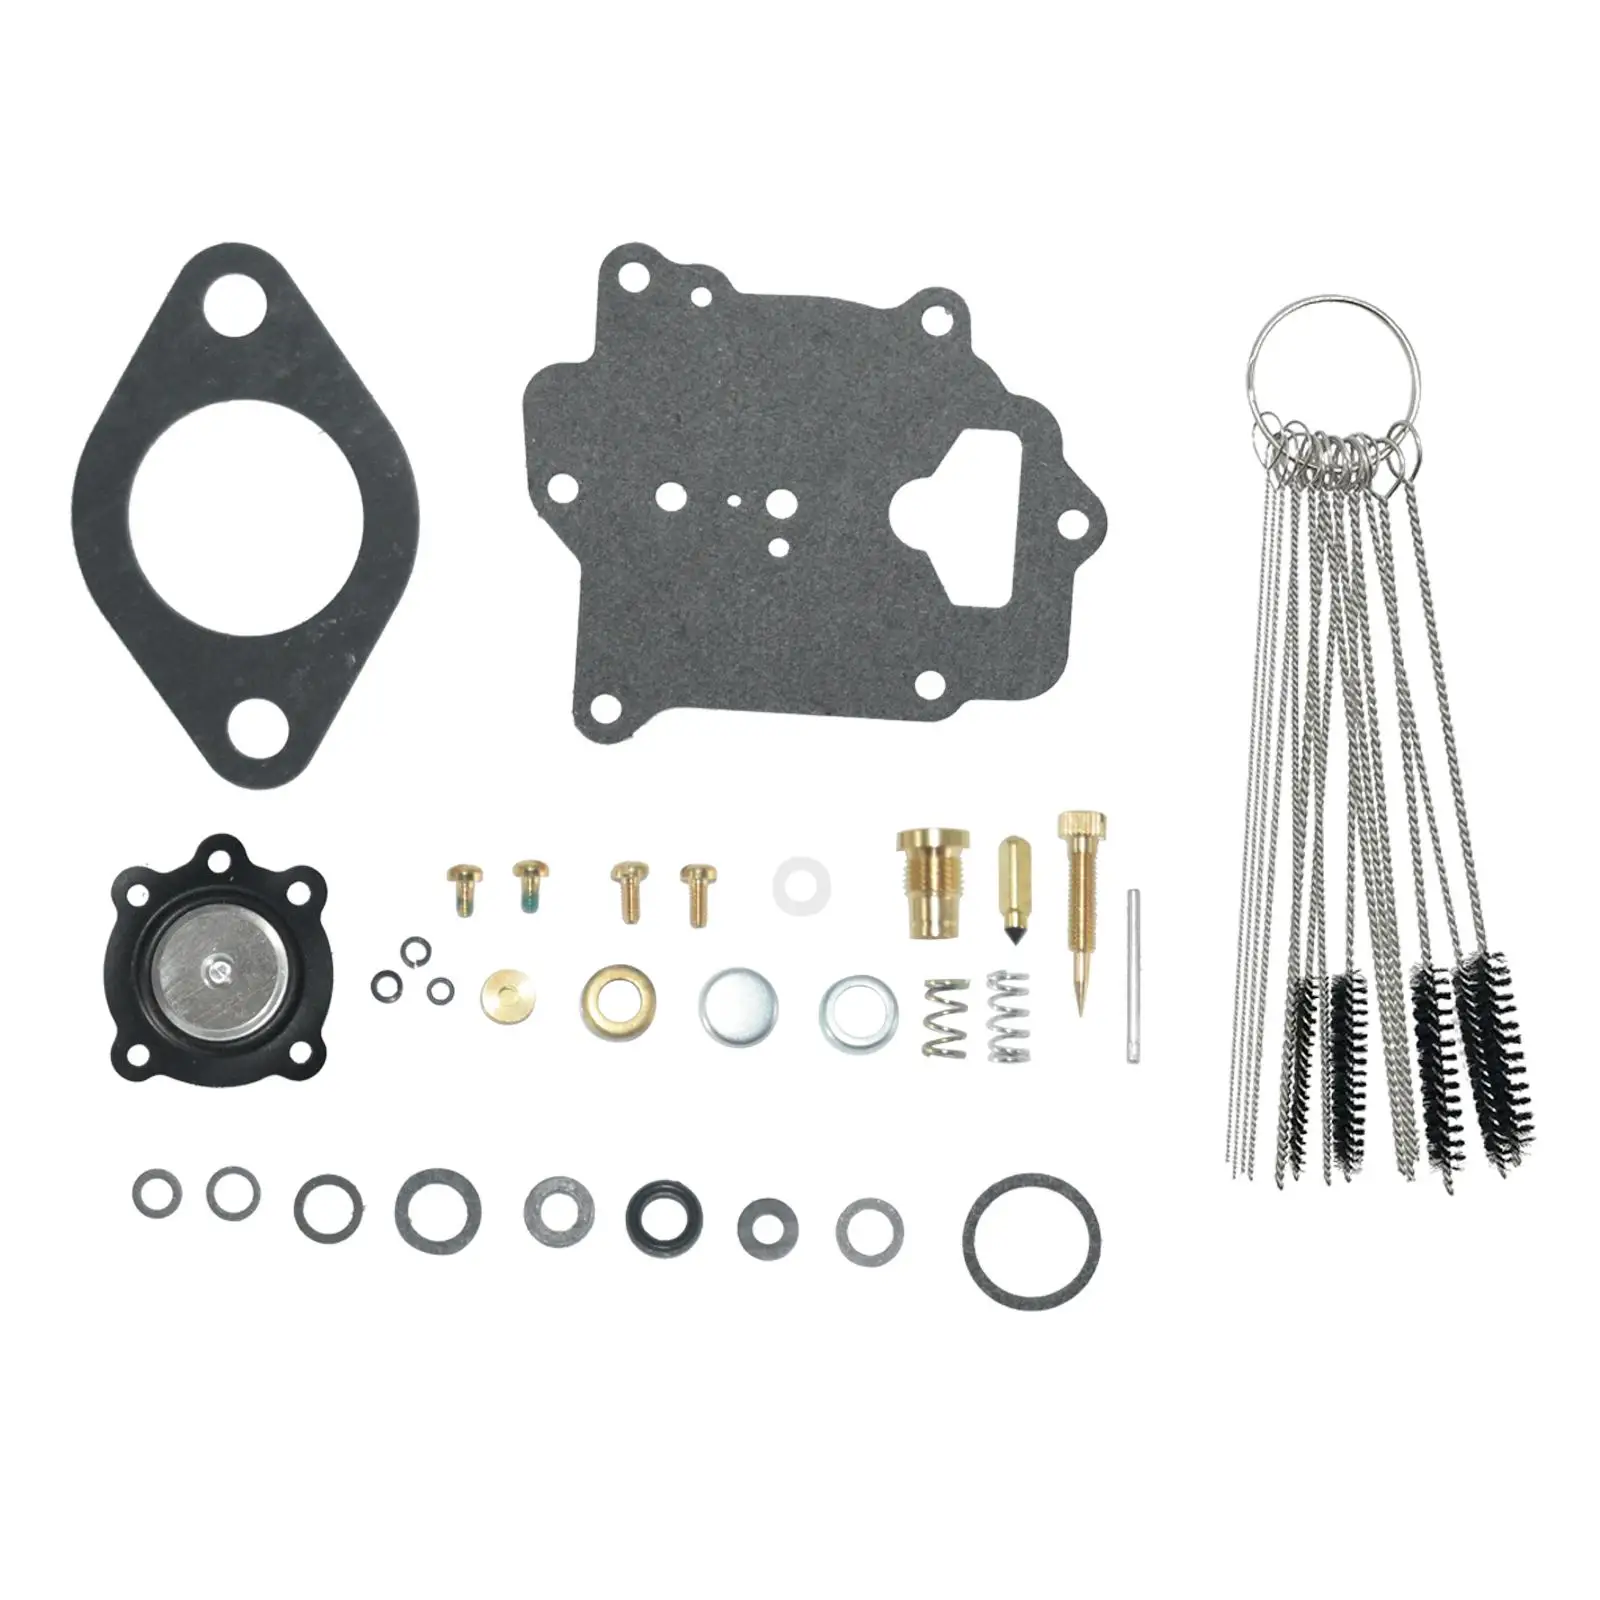 Carburetor Kit Easy to Install 13660 Spare Parts B1310 G43 Replacement Carburetor Rebuild Kit for Jeep M151 Mutt Amc 151